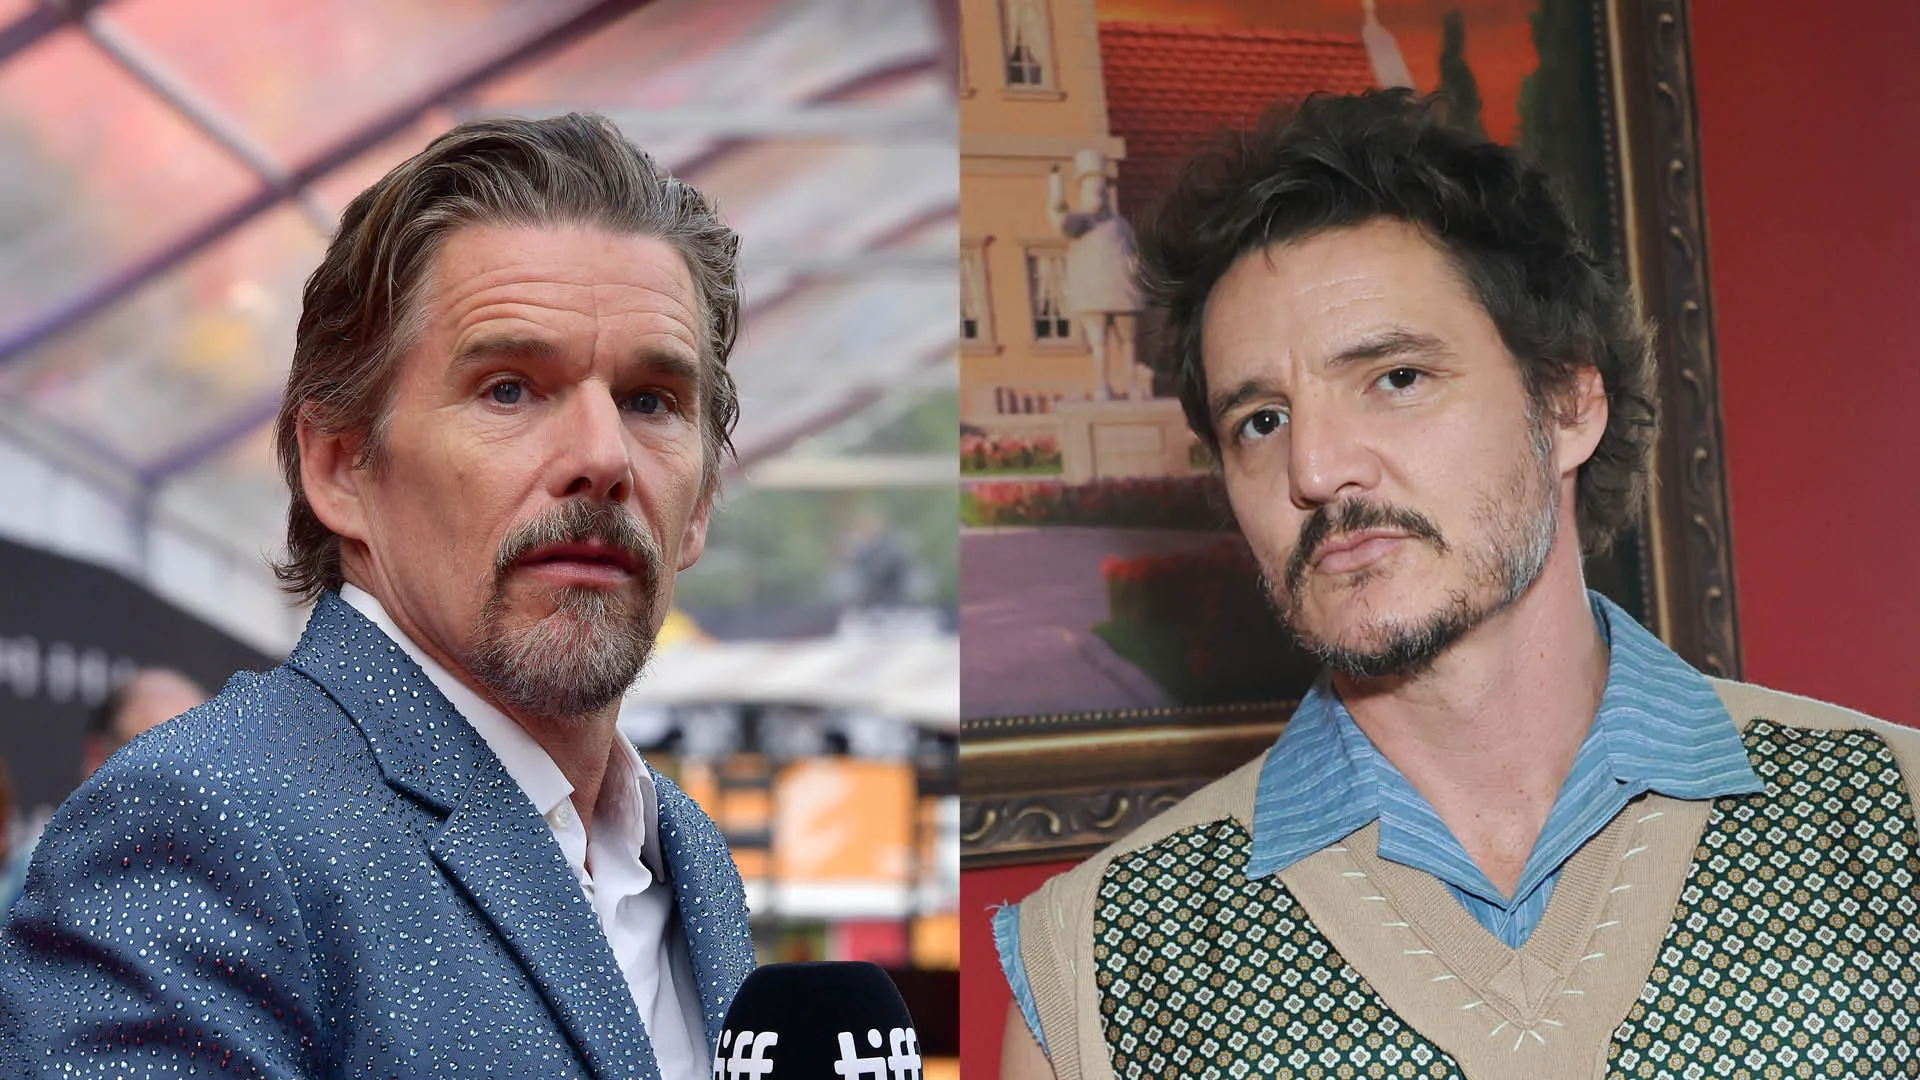 Pedro Pascal Teams Up with Ethan Hawke for a One-Night UK Film Premiere What to Expect